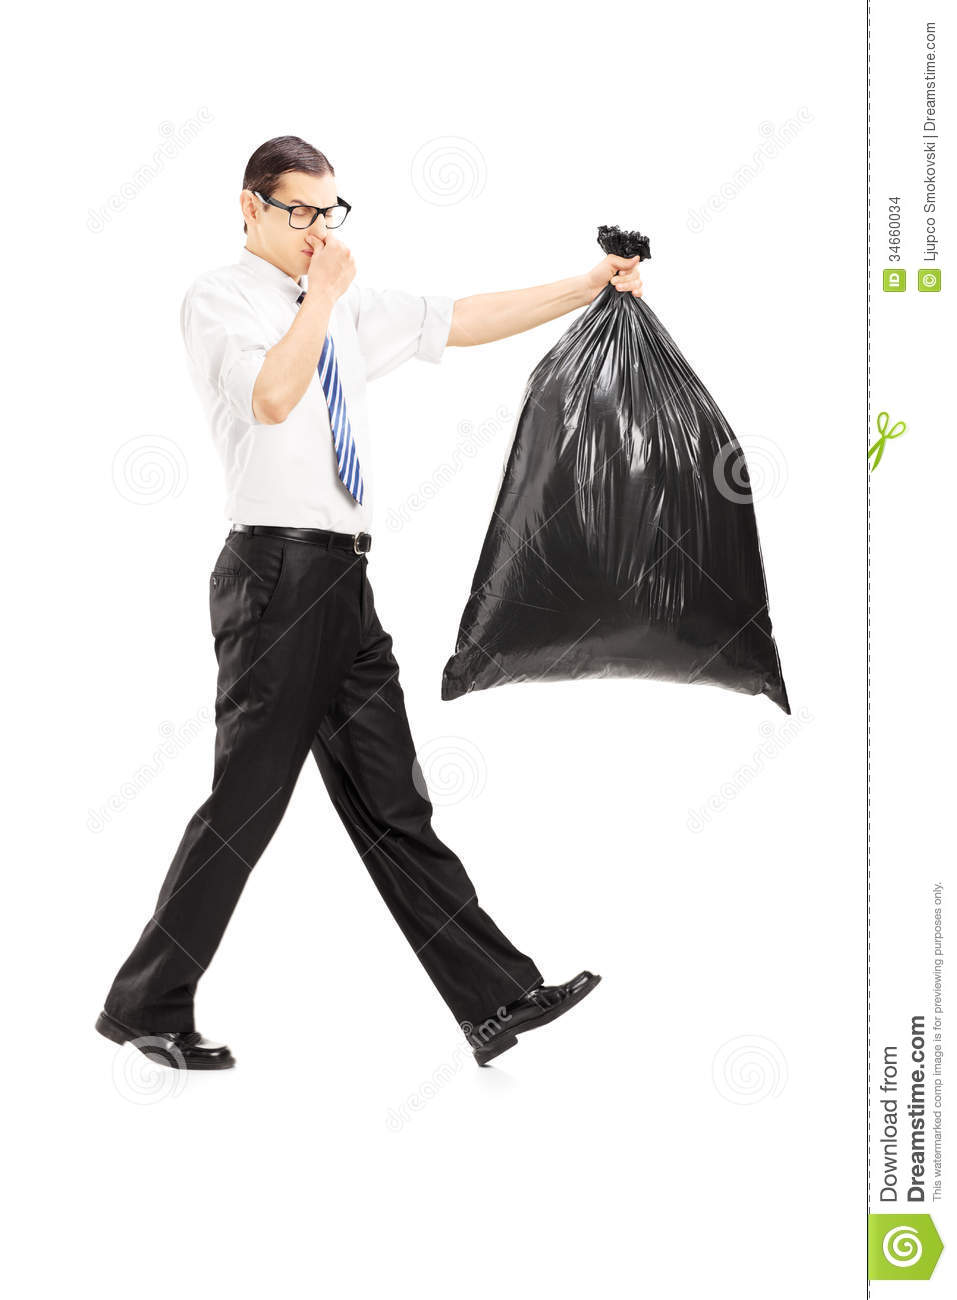 Male Closing His Nose And Carrying A Stinky Garbage Bag Stock Images